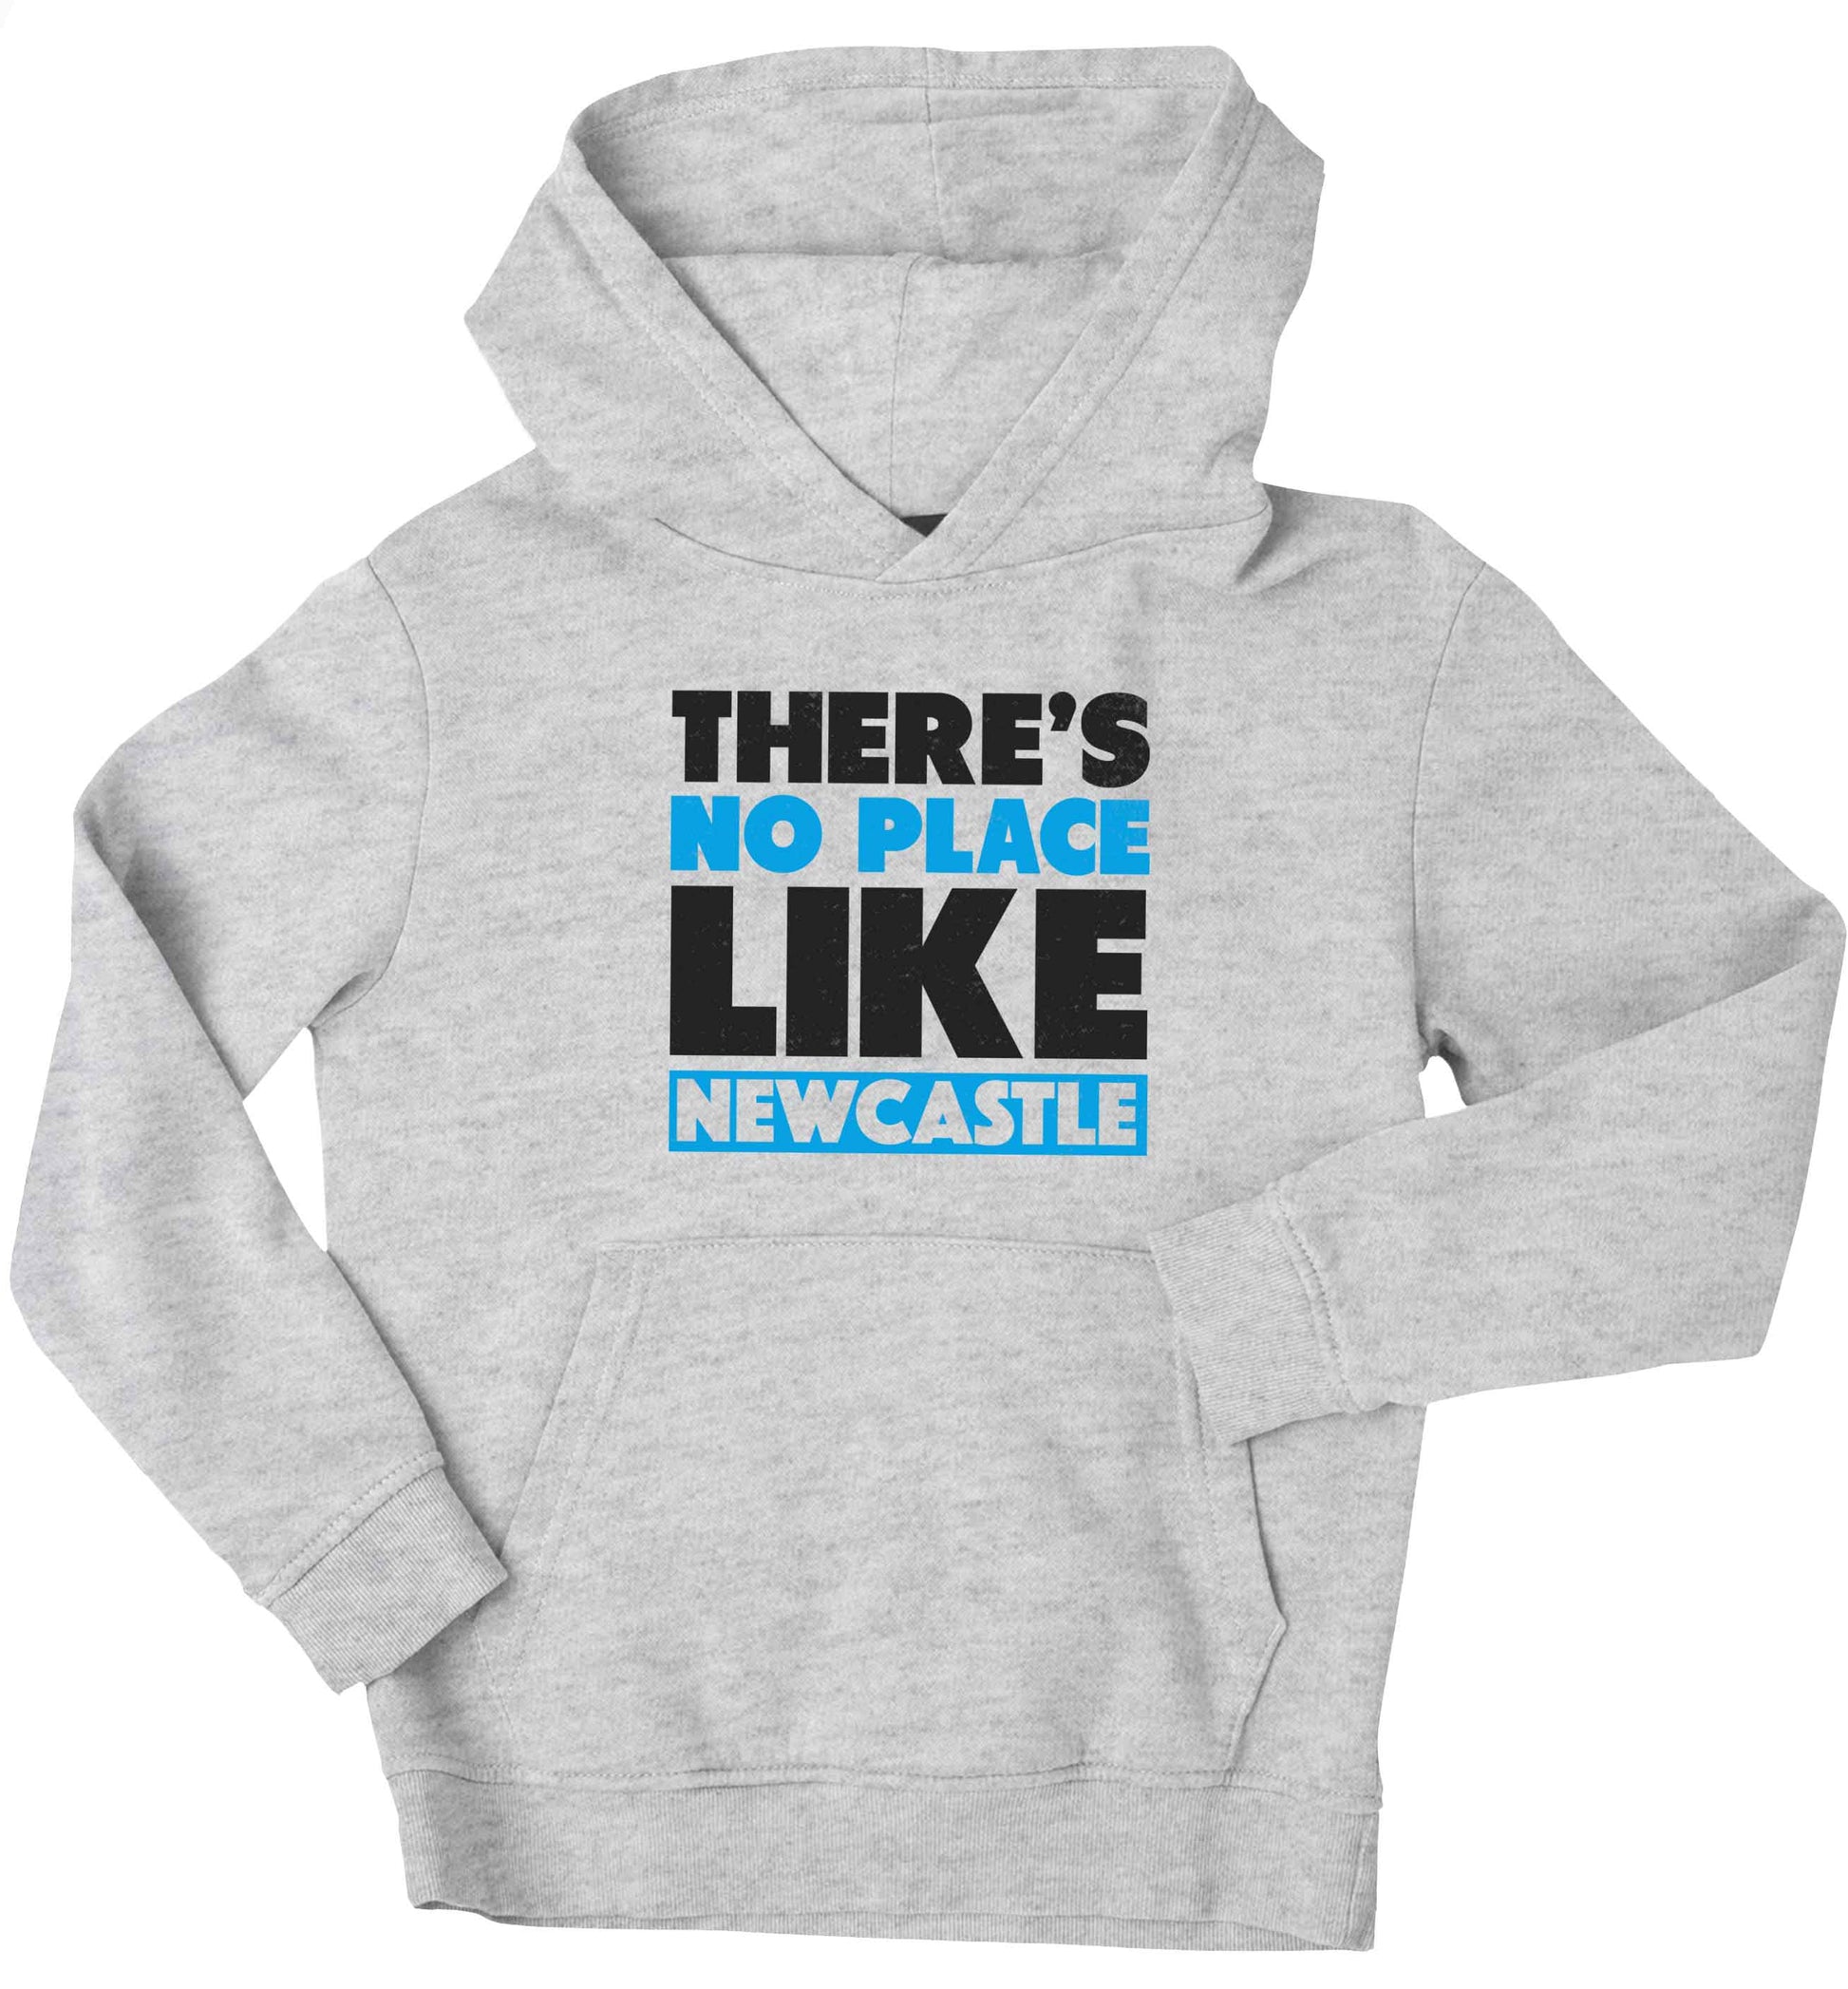 There's no place like Newcastle children's grey hoodie 12-13 Years